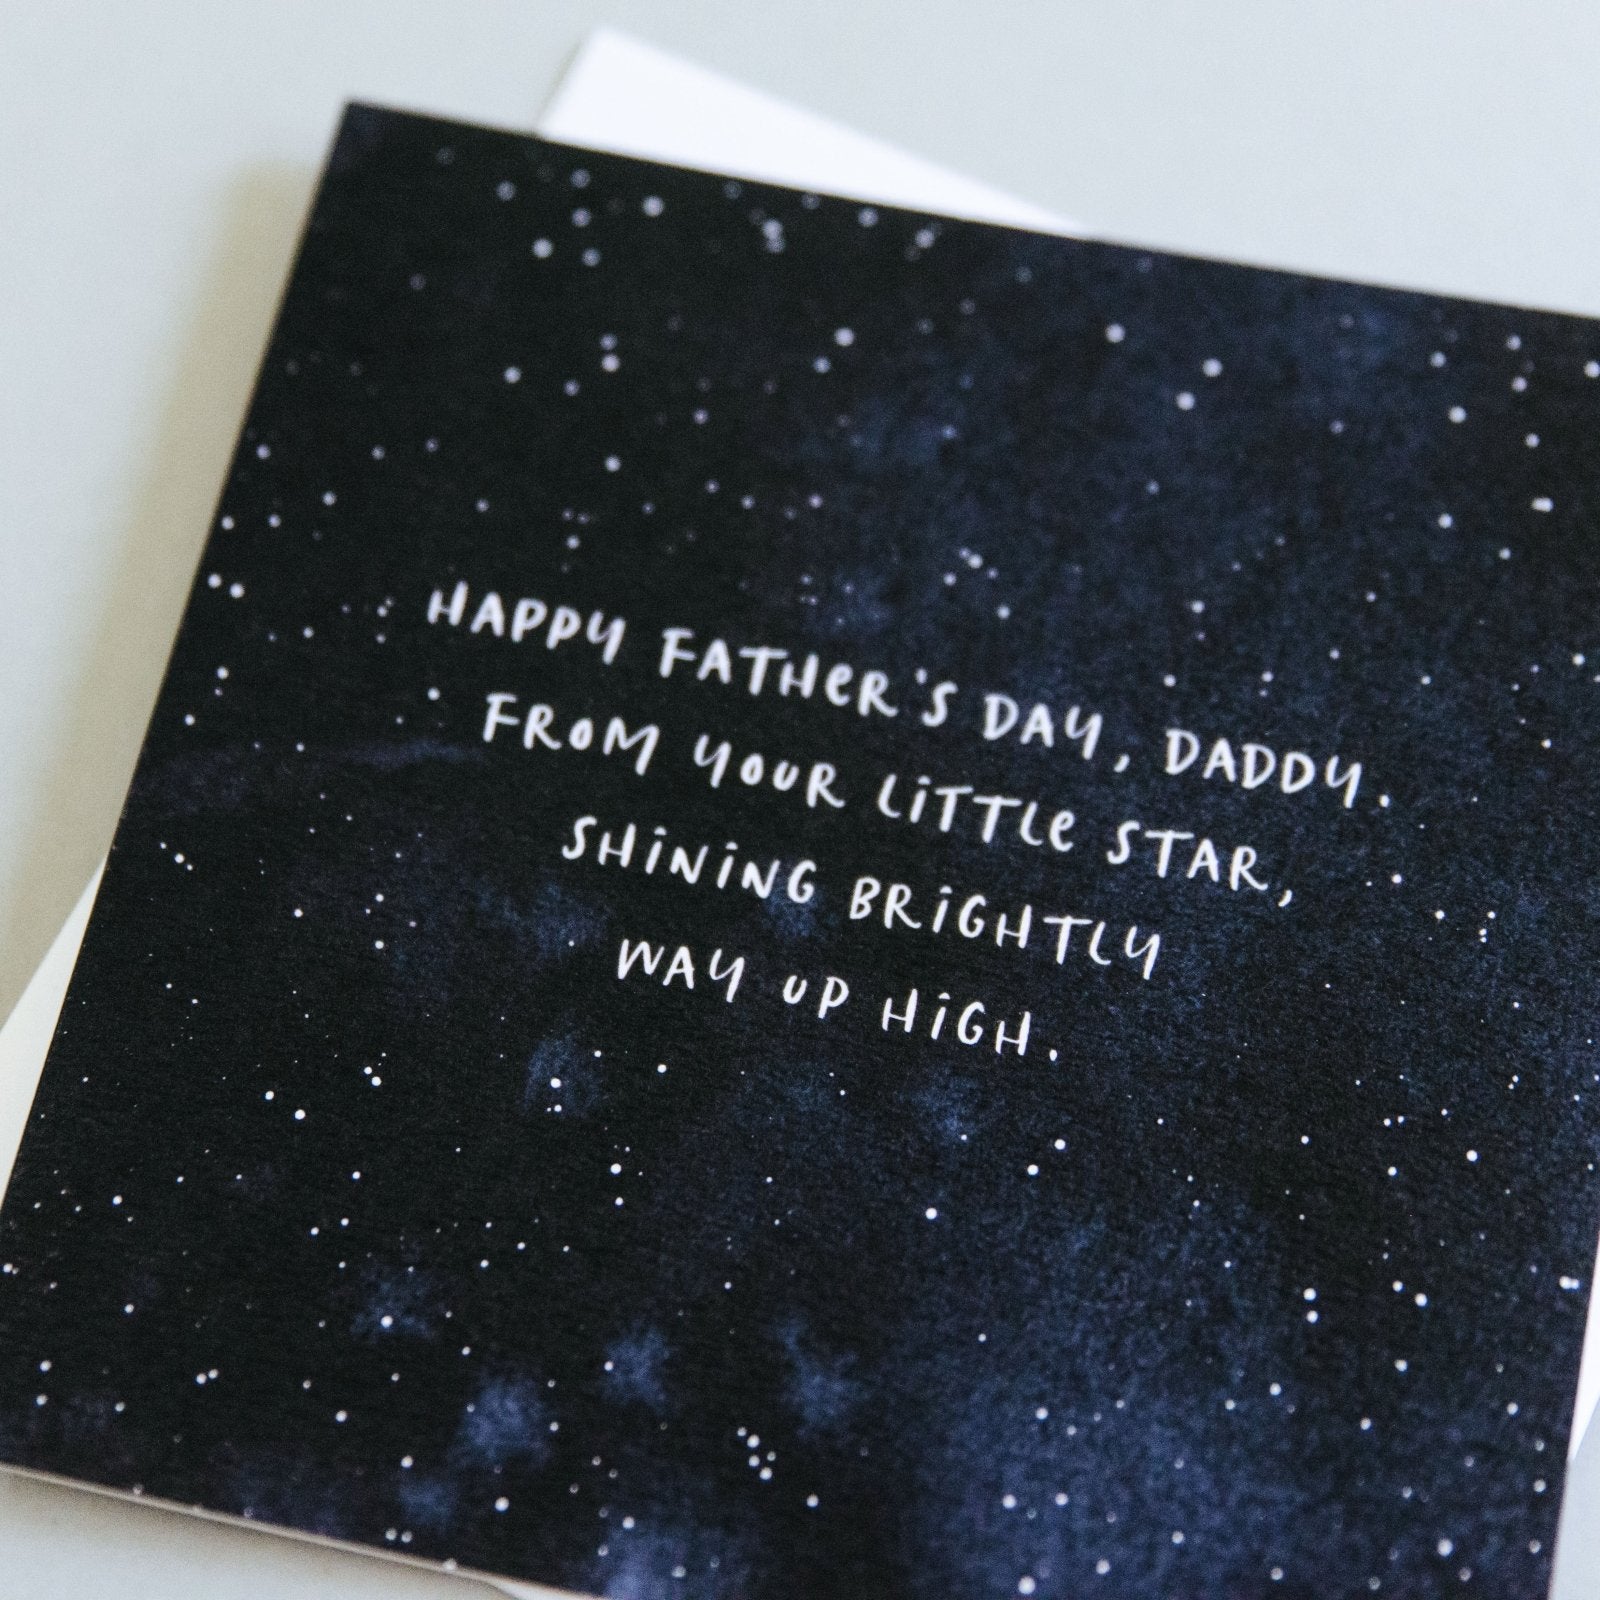 Bereaved Father's Day Card "From Your Little Star" - I am Nat Ltd - Greeting Card